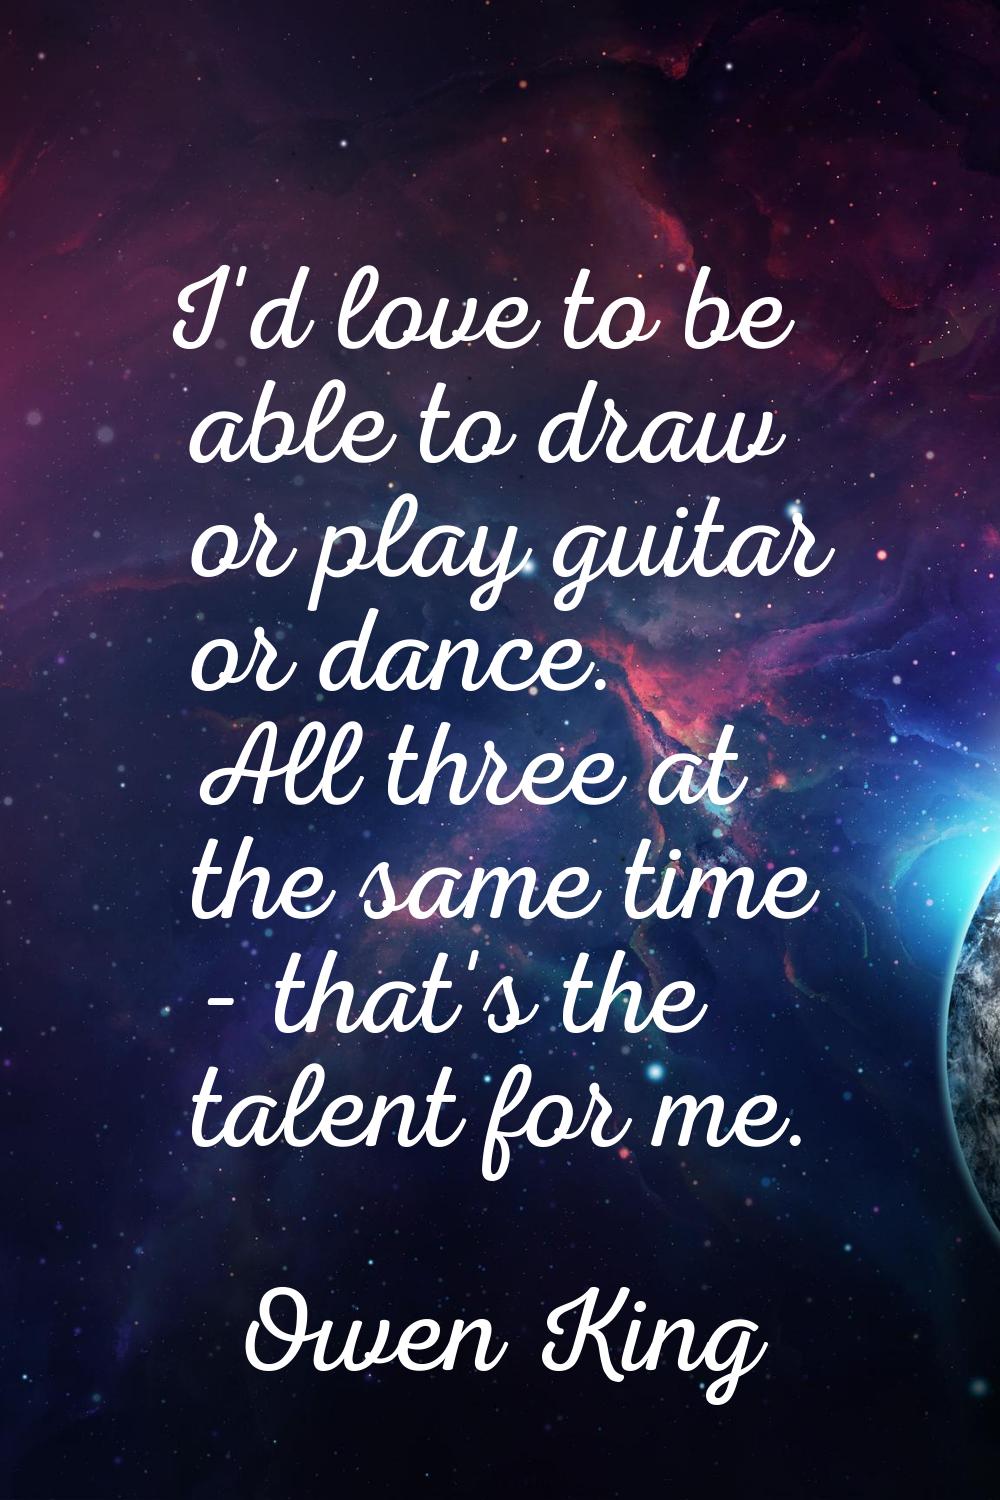 I'd love to be able to draw or play guitar or dance. All three at the same time - that's the talent